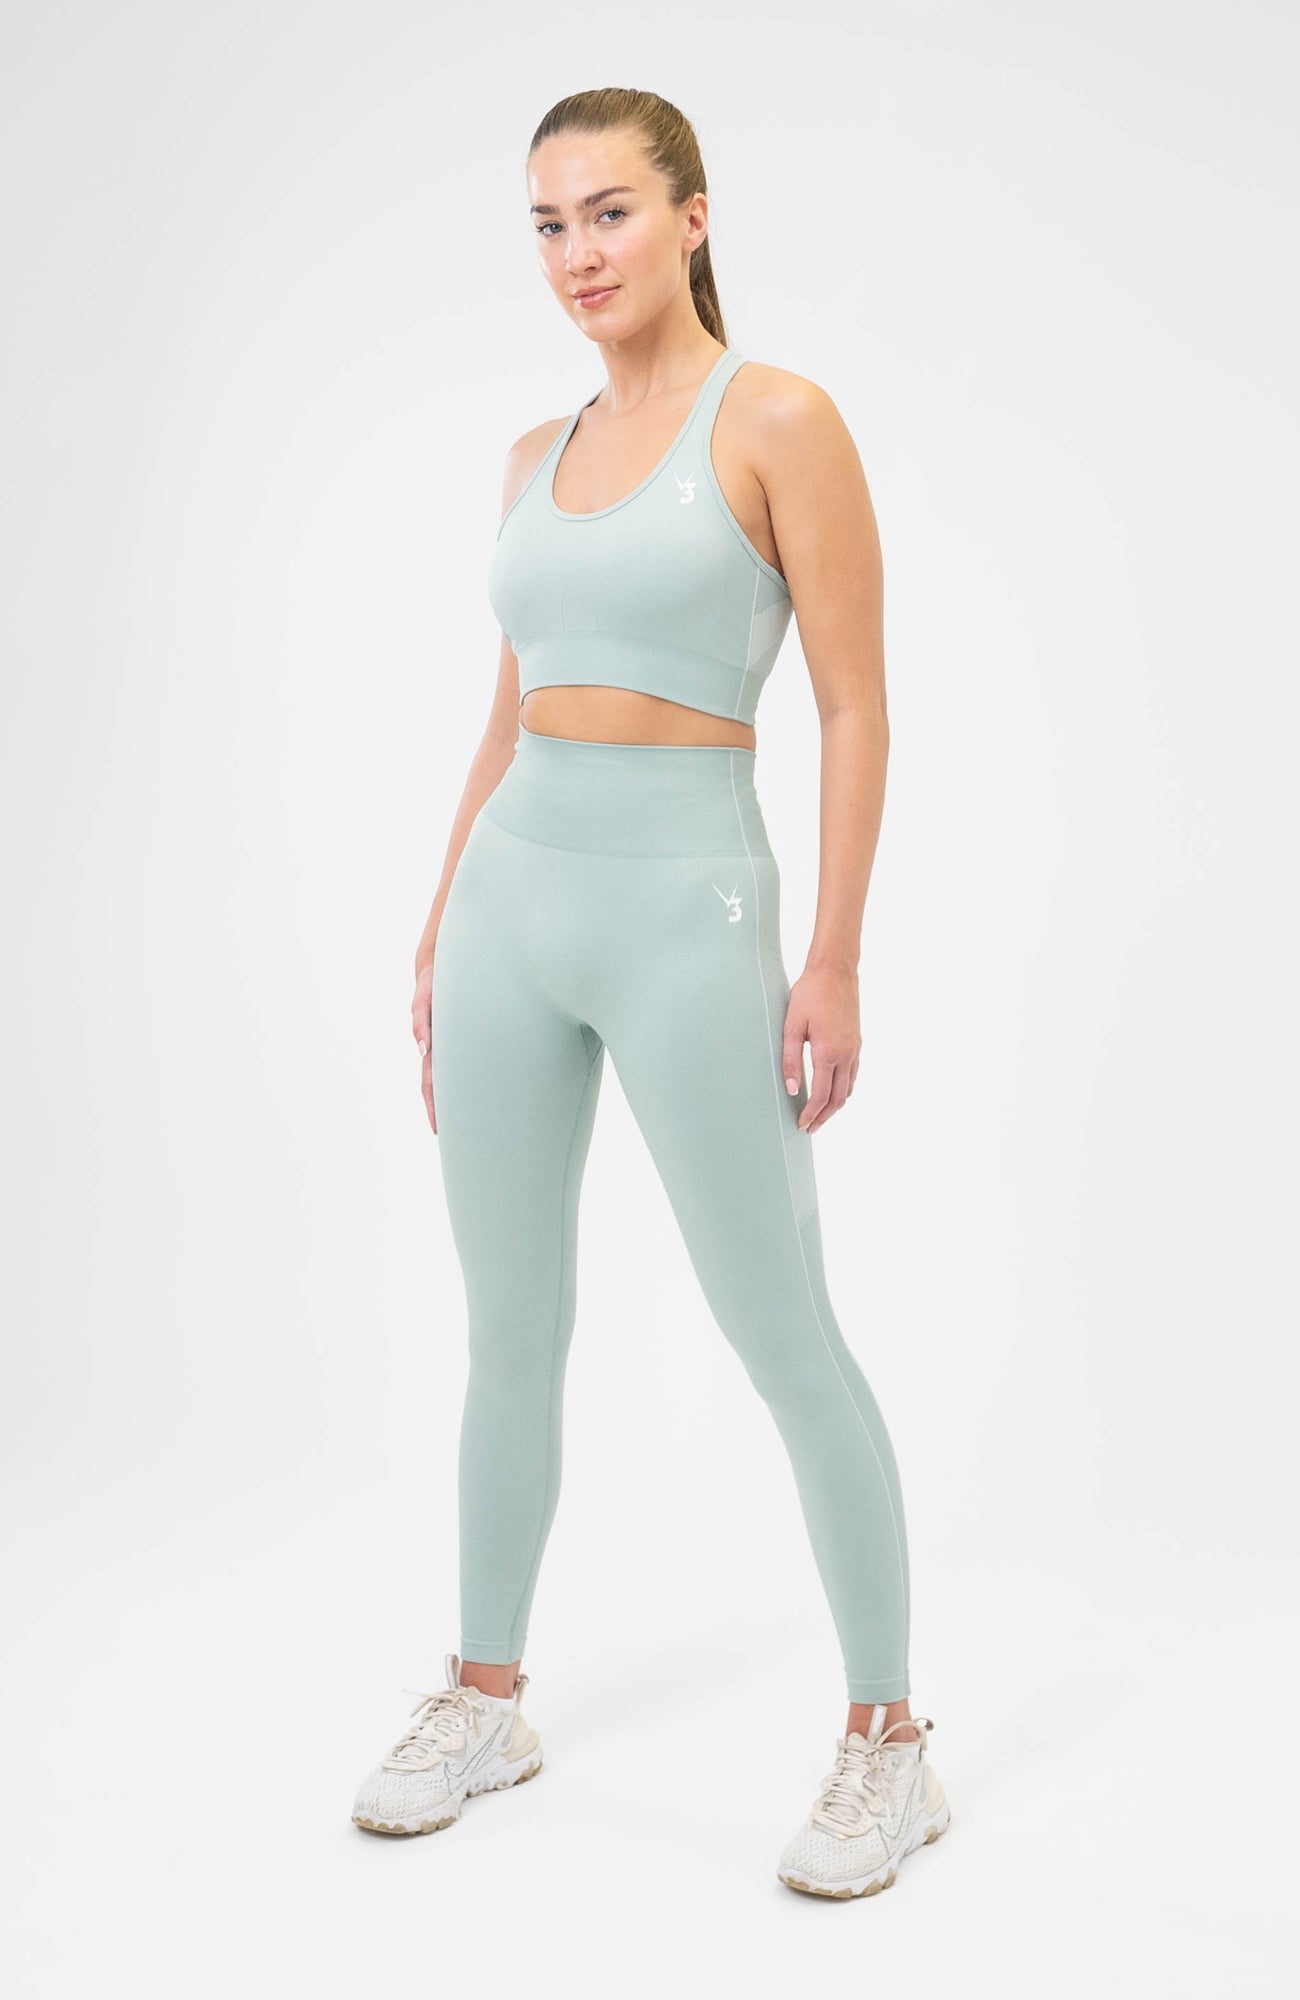 V3 Apparel Women's Unity seamless high waisted, bum shaping leggings in mint green – Squat proof sports tights for Gym workouts training, Running, yoga, bodybuilding and bikini fitness.